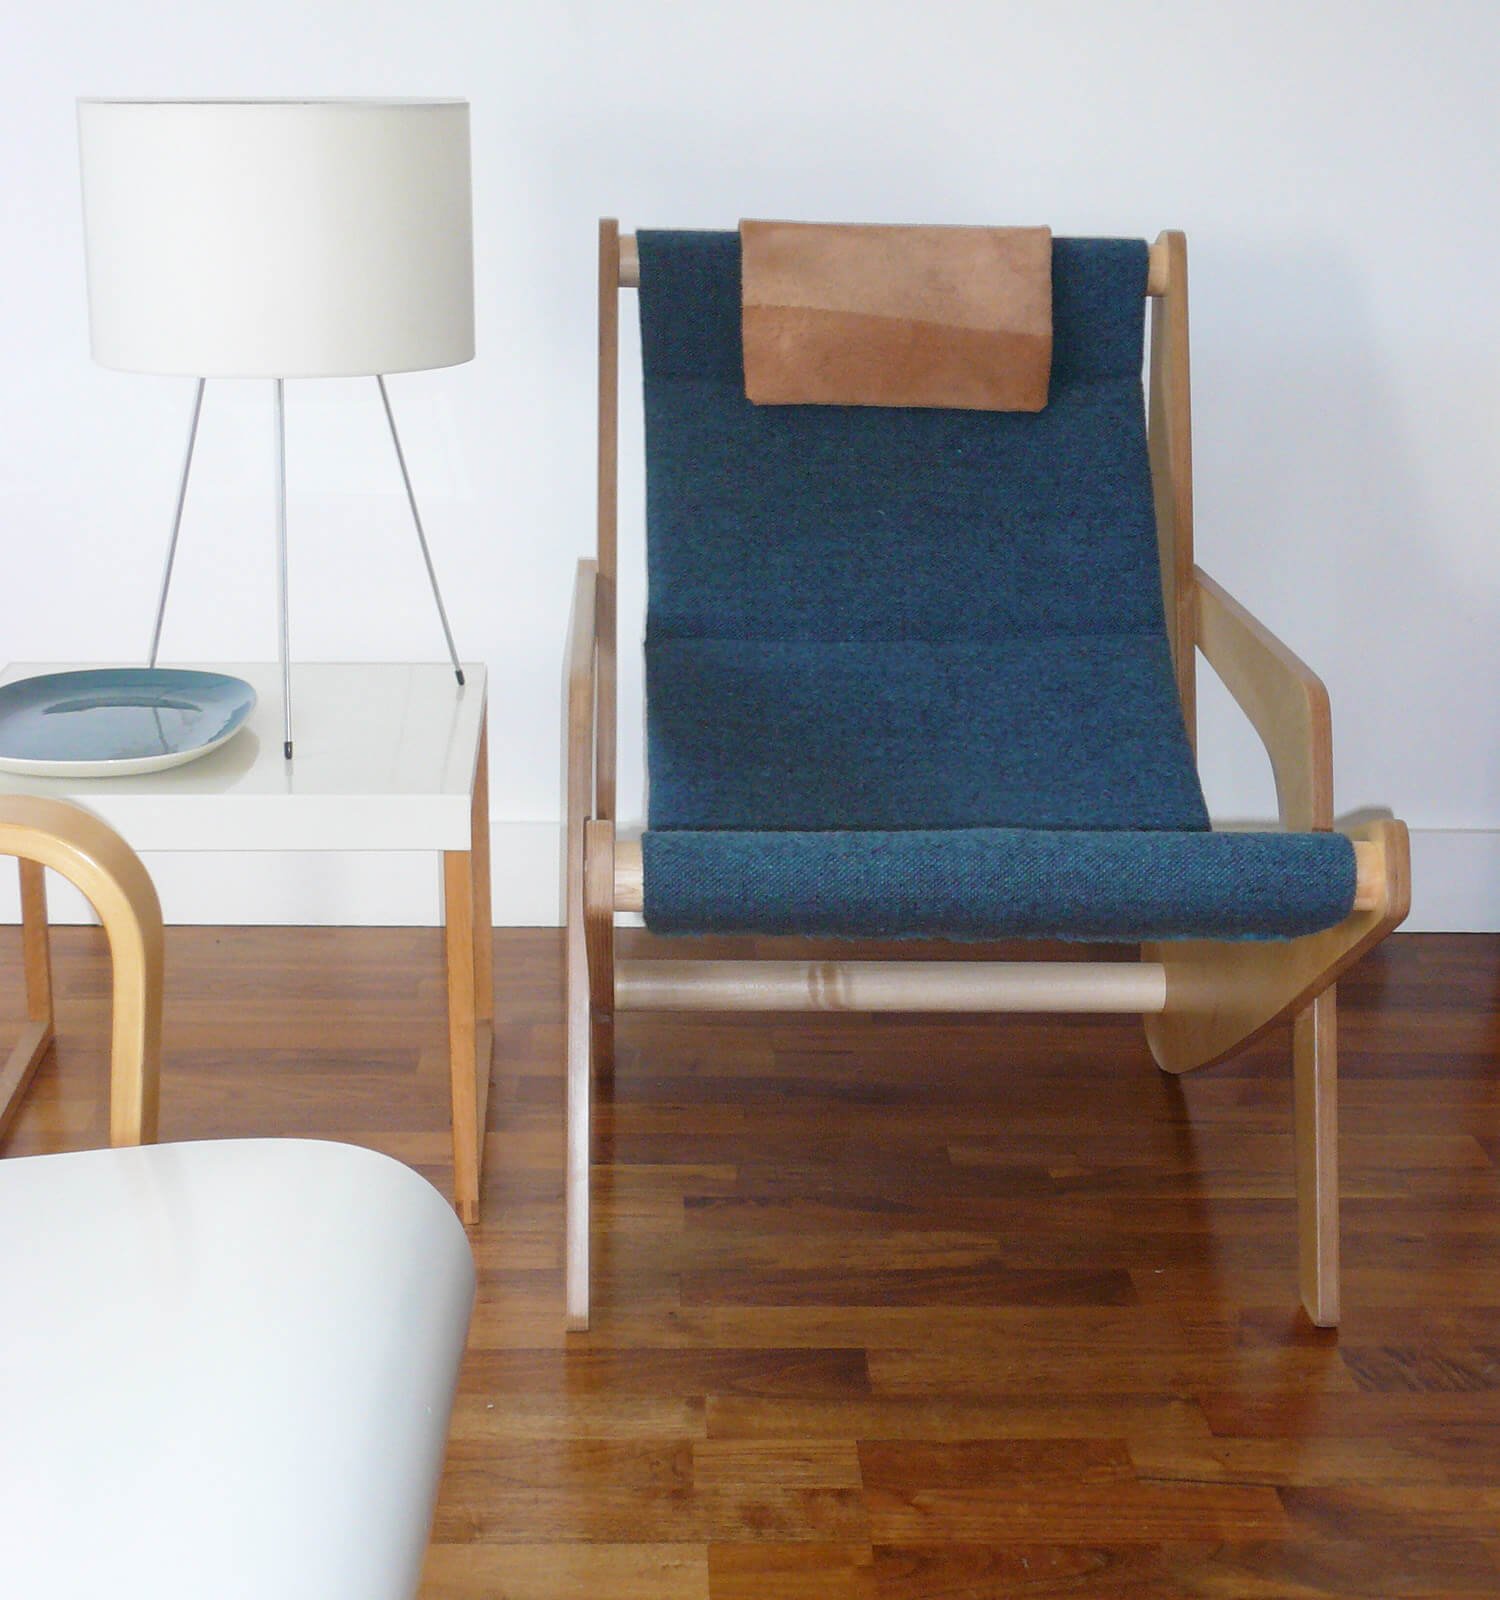 Slip Chair designed by Utility, made in London